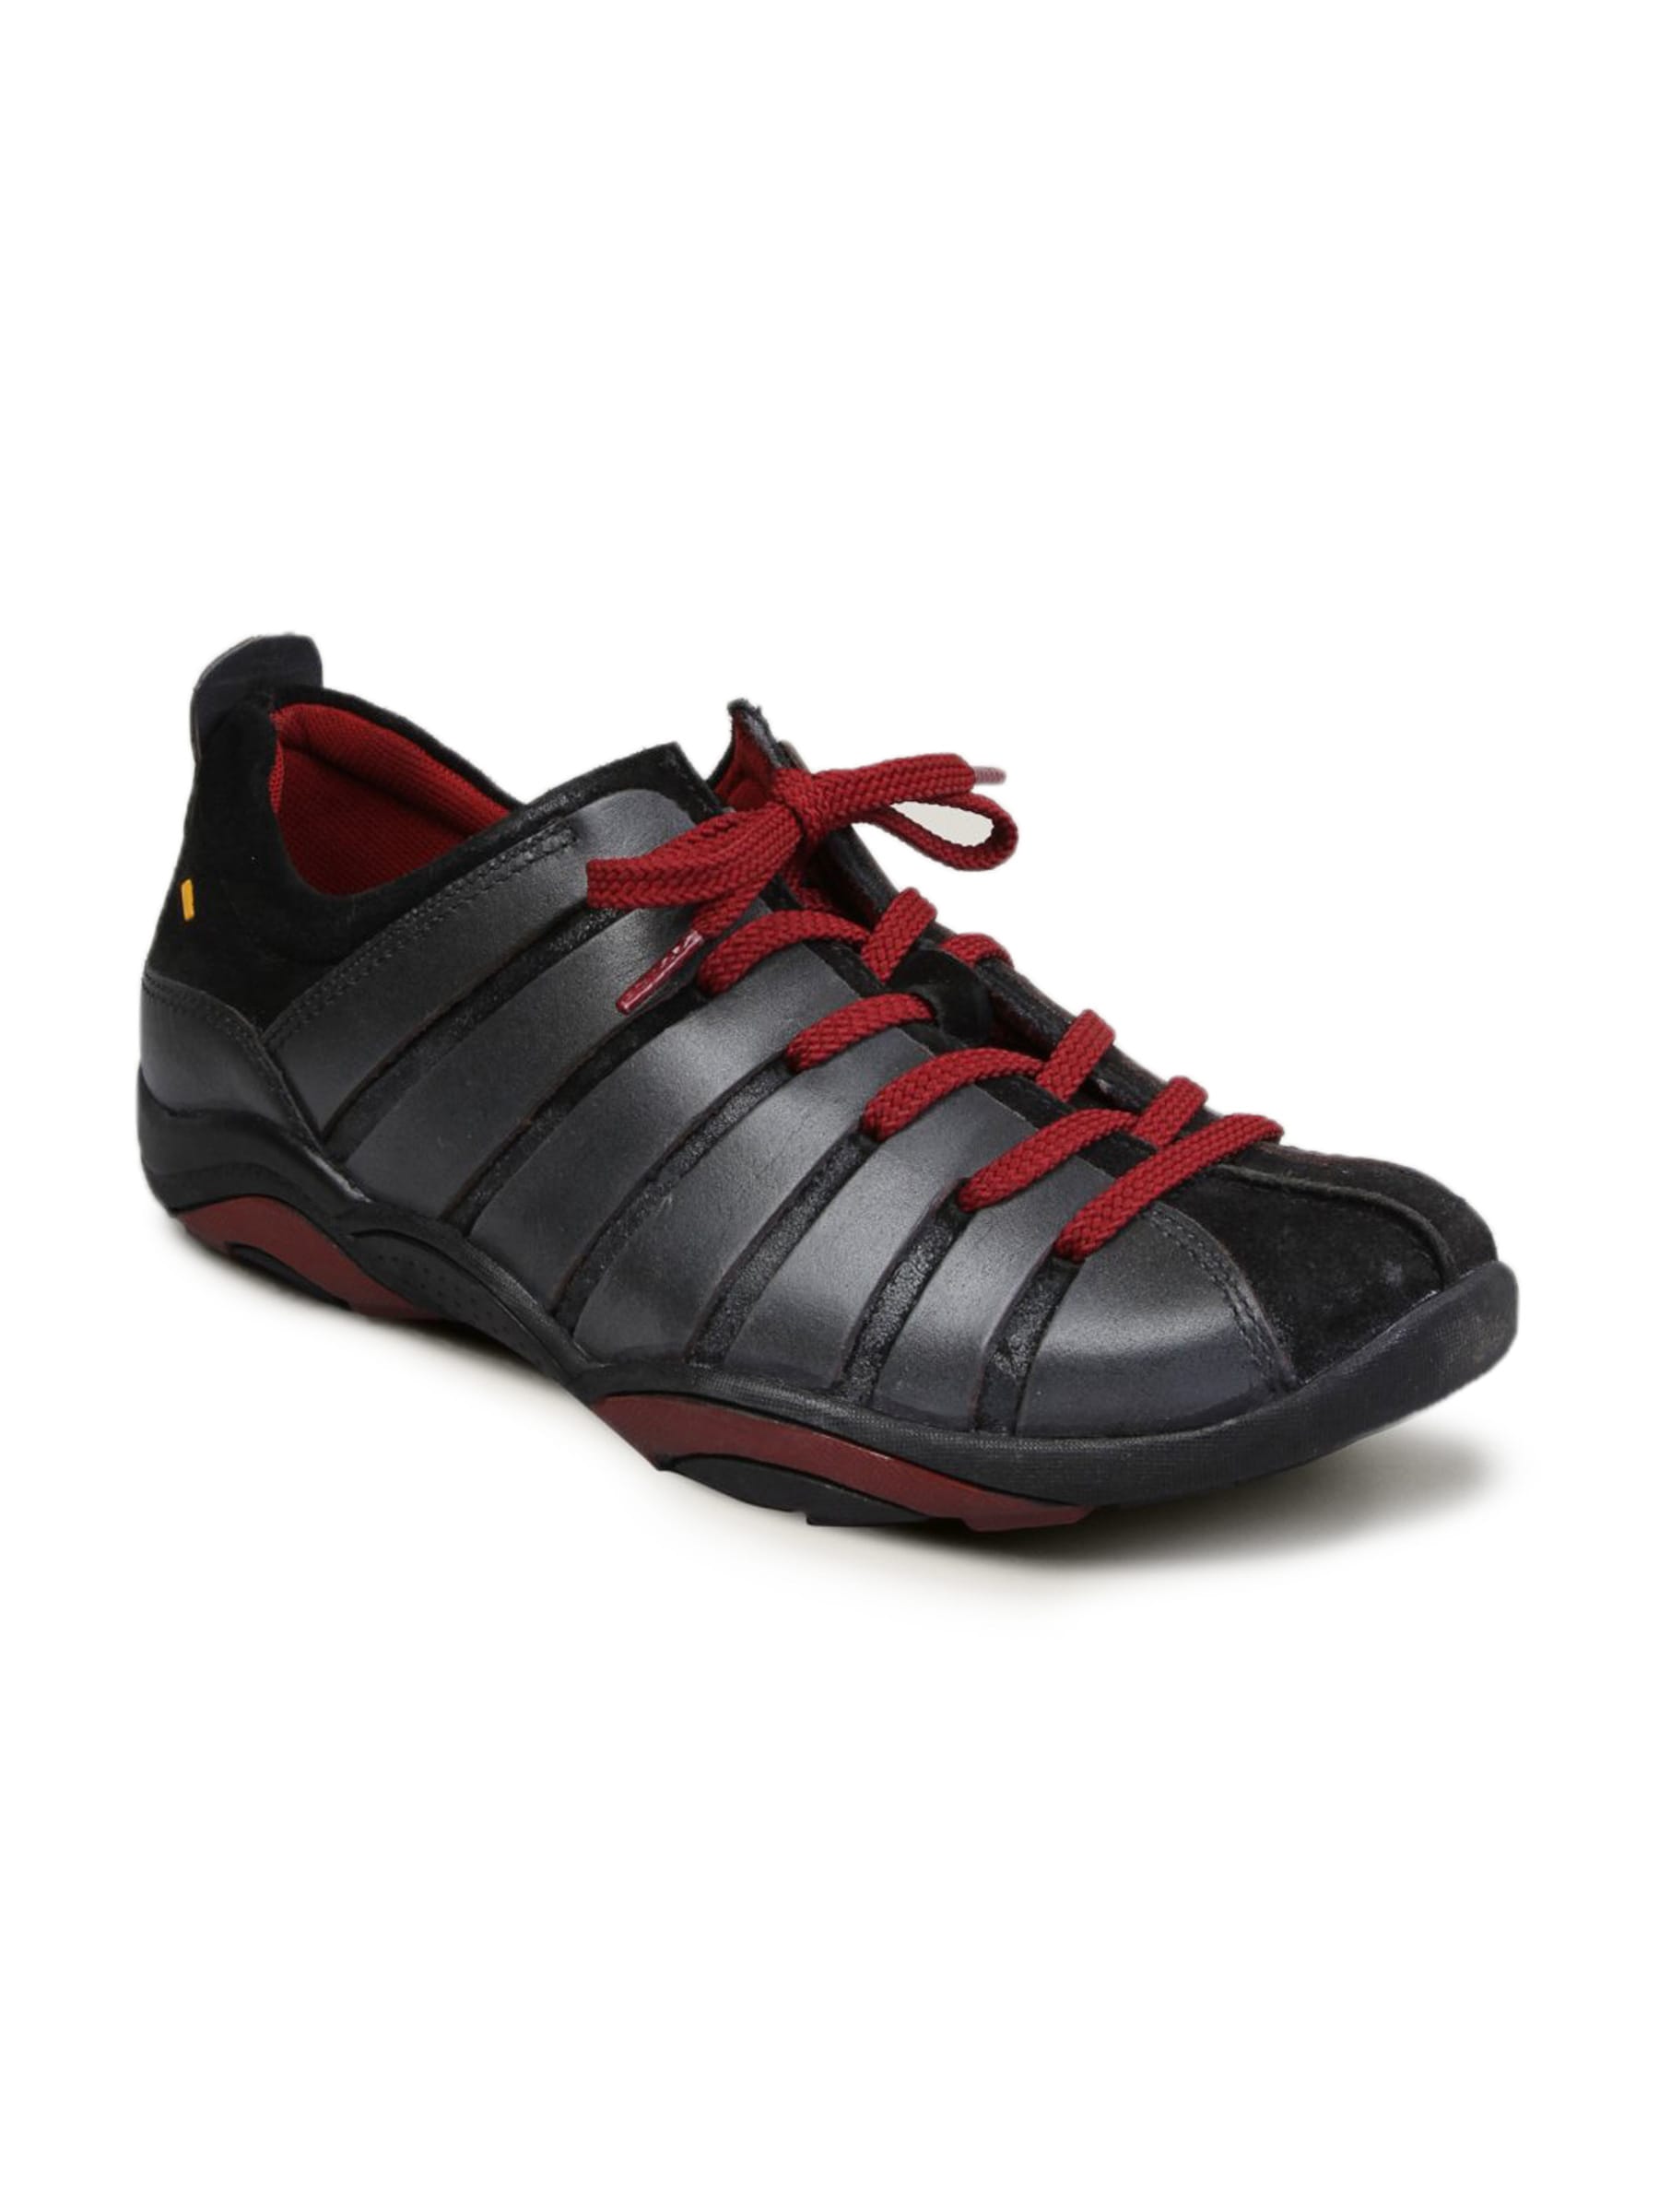 iD Men's Casual Leather Charcoal Funky Shoe